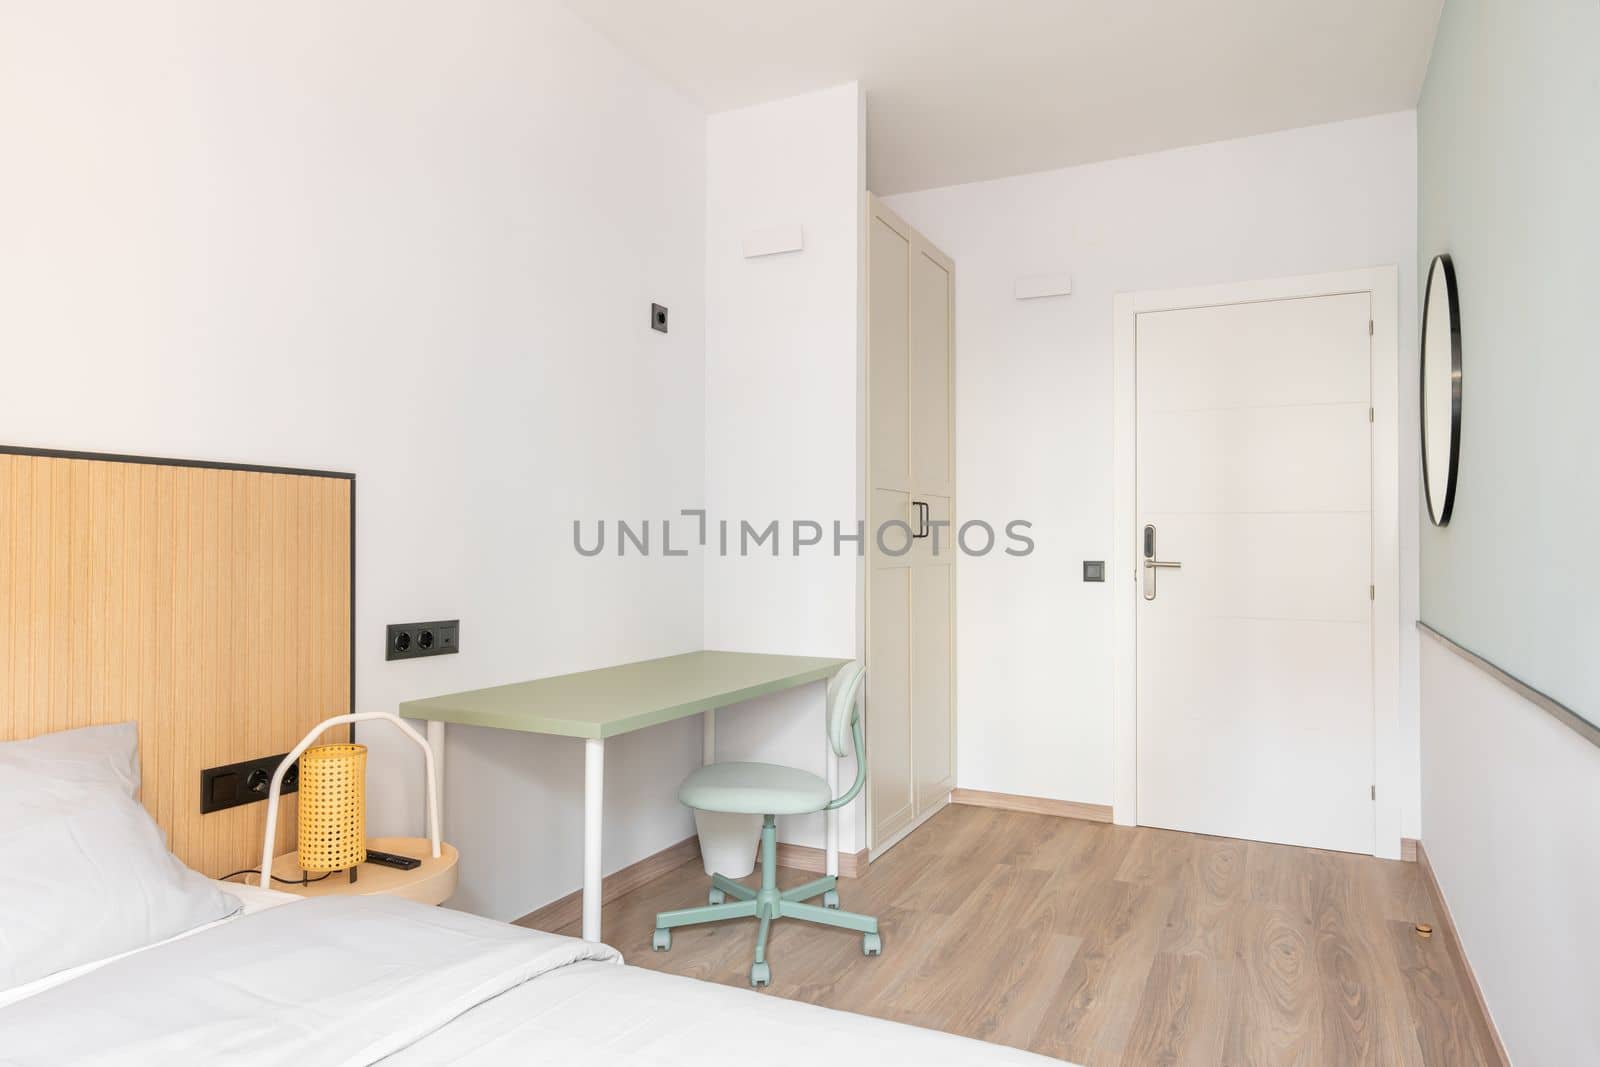 Brightly lit room with daylight bright light. Room for extended stay. Wardrobe for clothes, table and chair for working space, bed for sound sleep. Entrance door with electronic lock